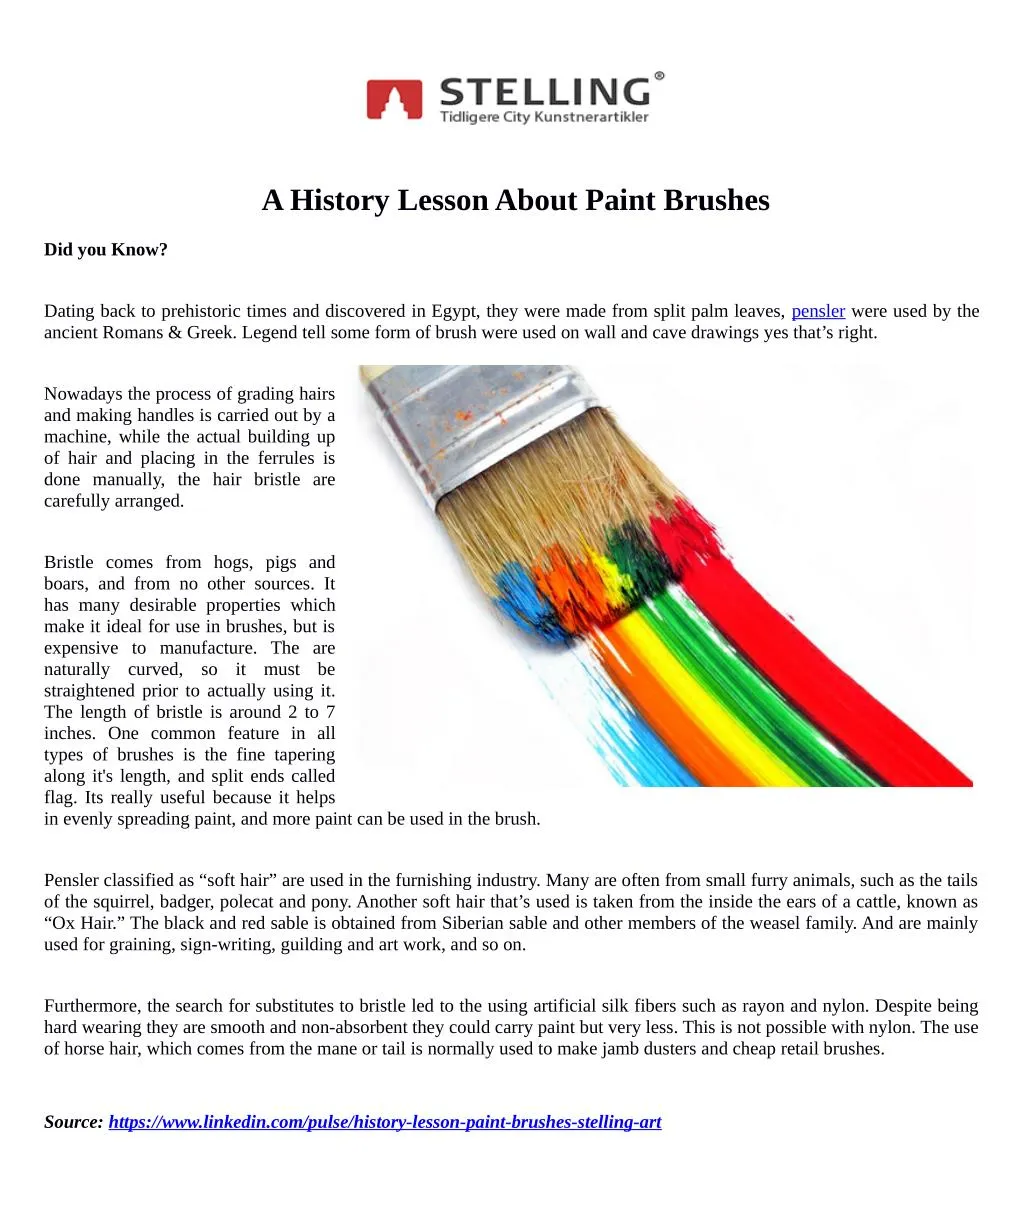 a history lesson about paint brushes